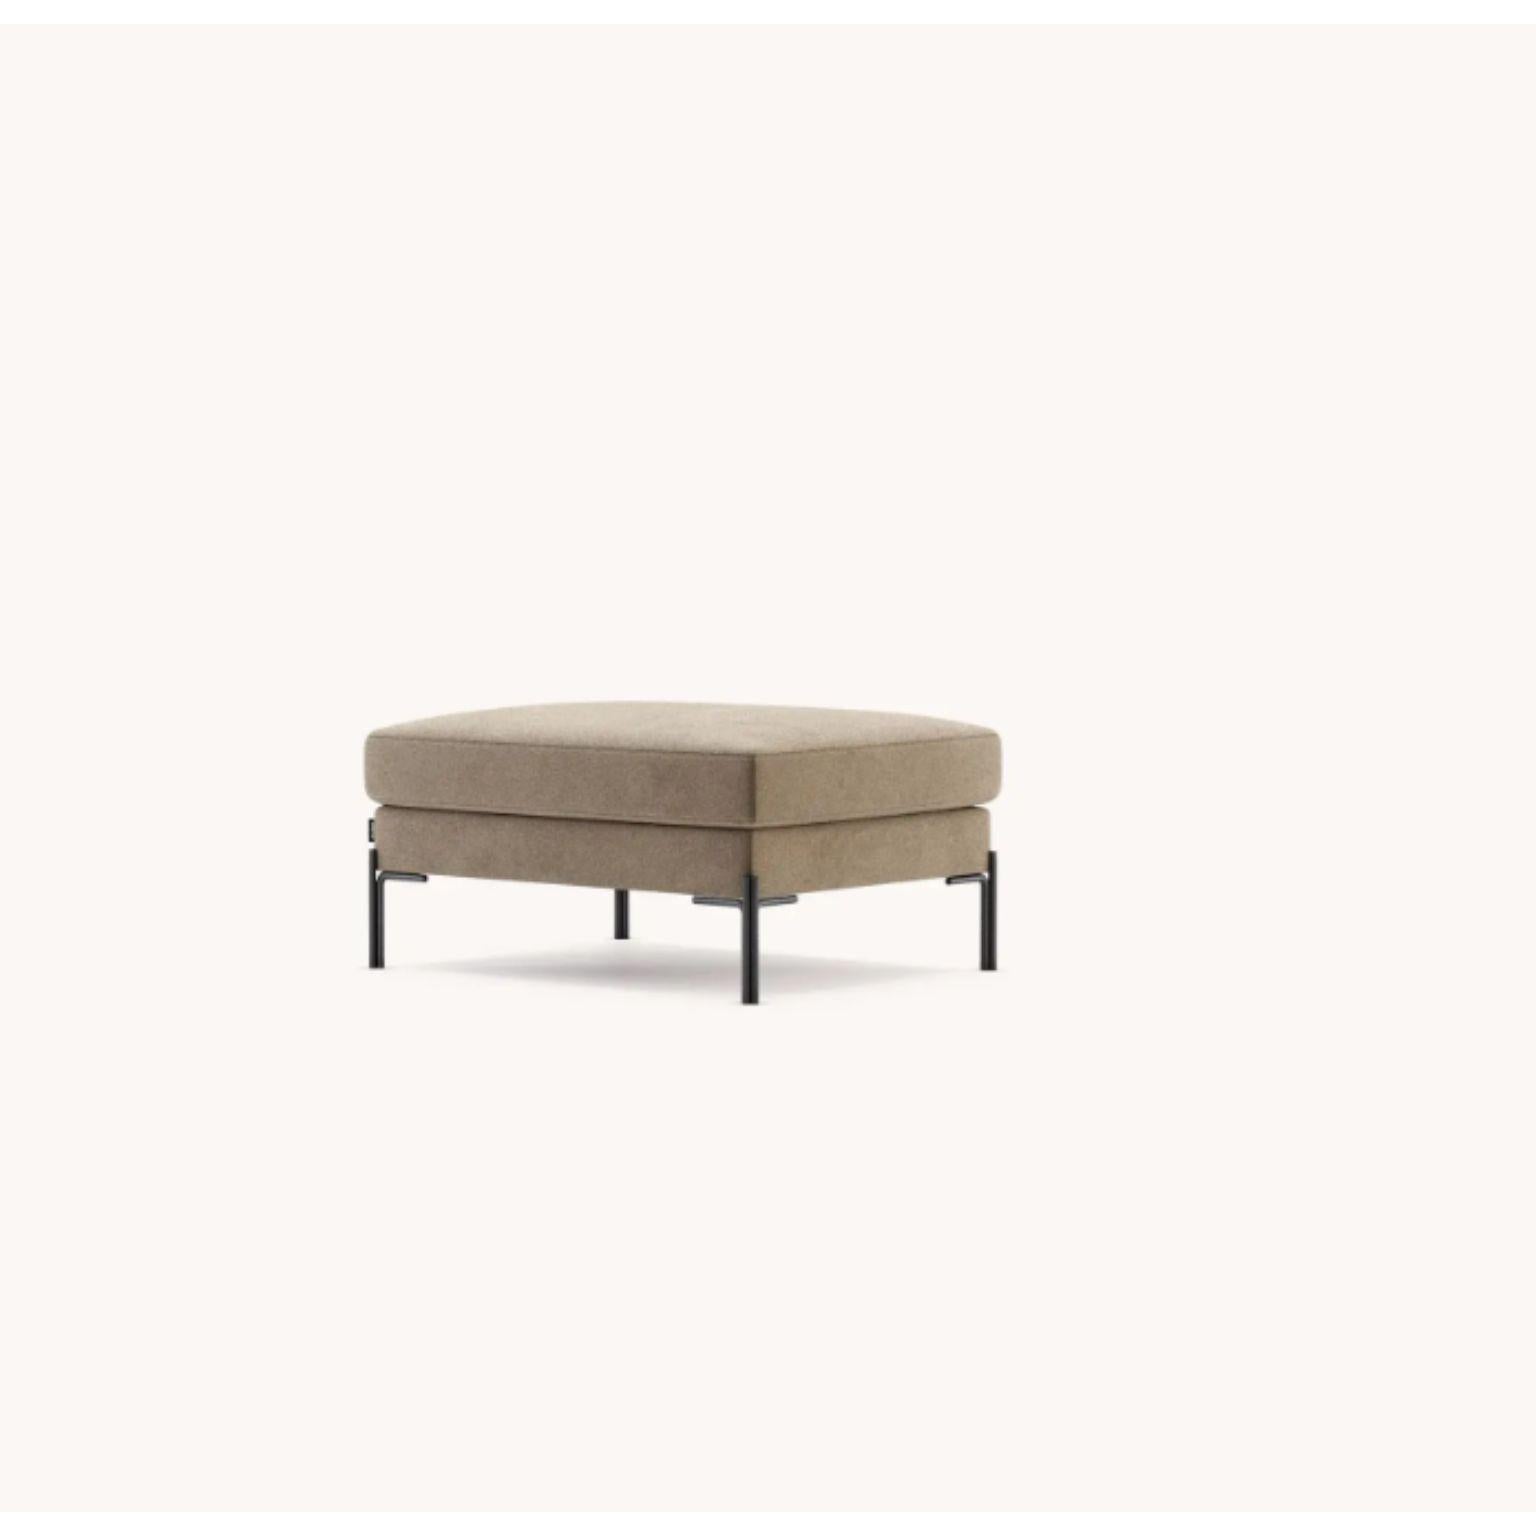 Nicole Pouf by Domkapa
Materials: velvet (Neva 2206), black texturized steel. 
Dimensions: W 94 x D 74 x H 44 cm.
Also available in different materials. 

A British-inspired design is what best defines Nicole sofa. With classic style, it